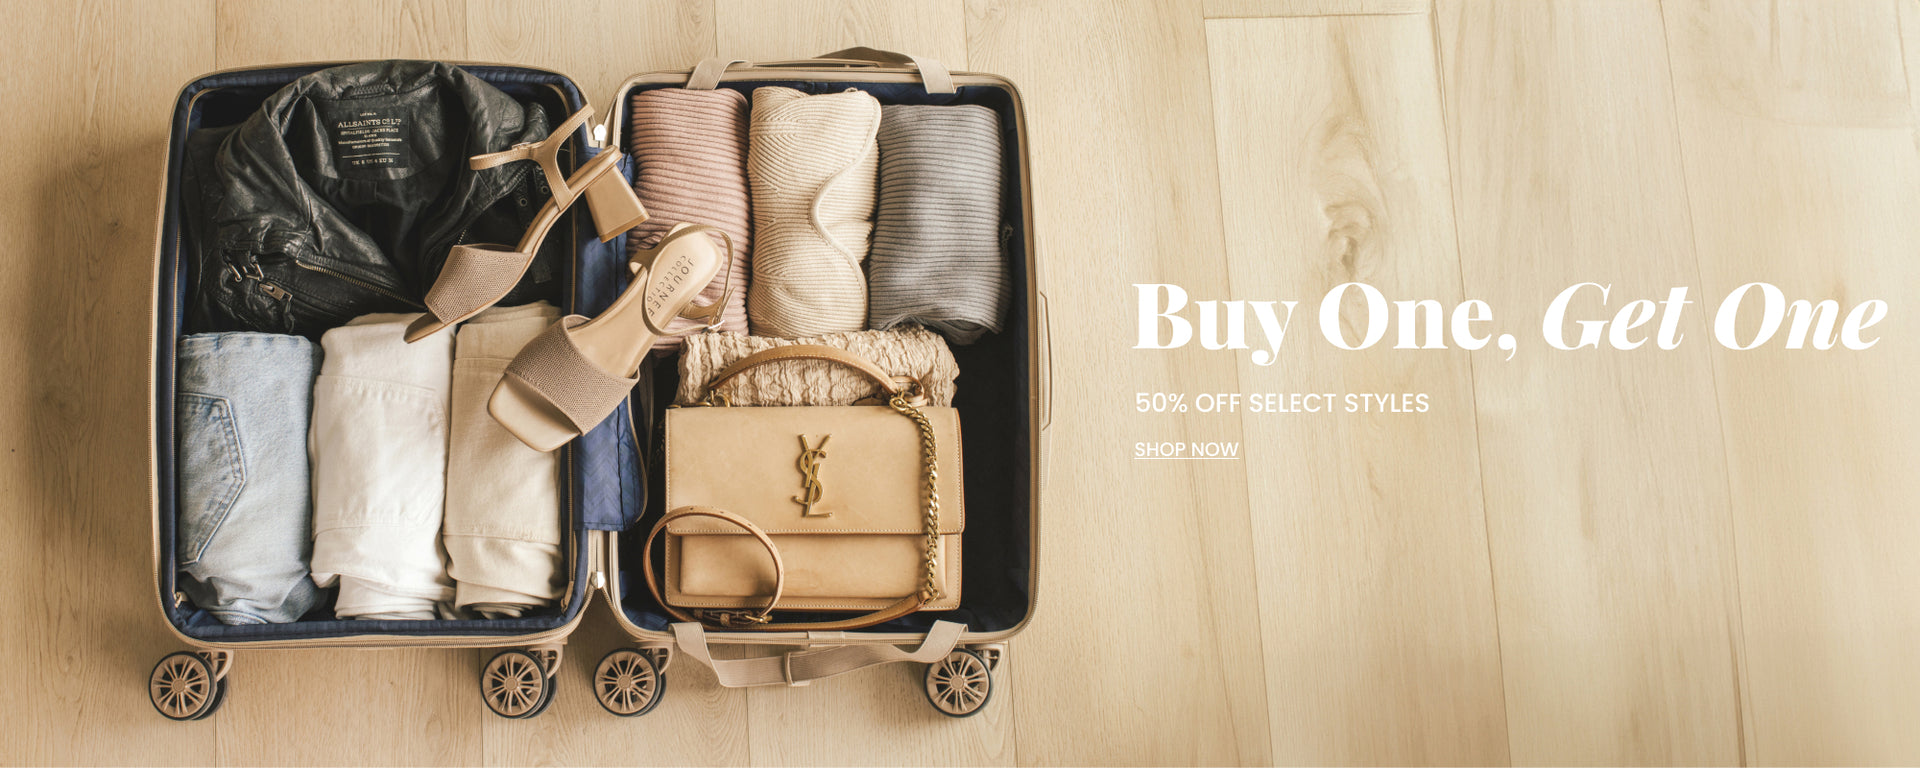 Hero image: open suit case with luxury clothes carefully folded inside. Nude colored Journee strappy sandals rest on top. Header text: "Buy One Get One 50% off select styles" CTA: "shop now" links to collection.